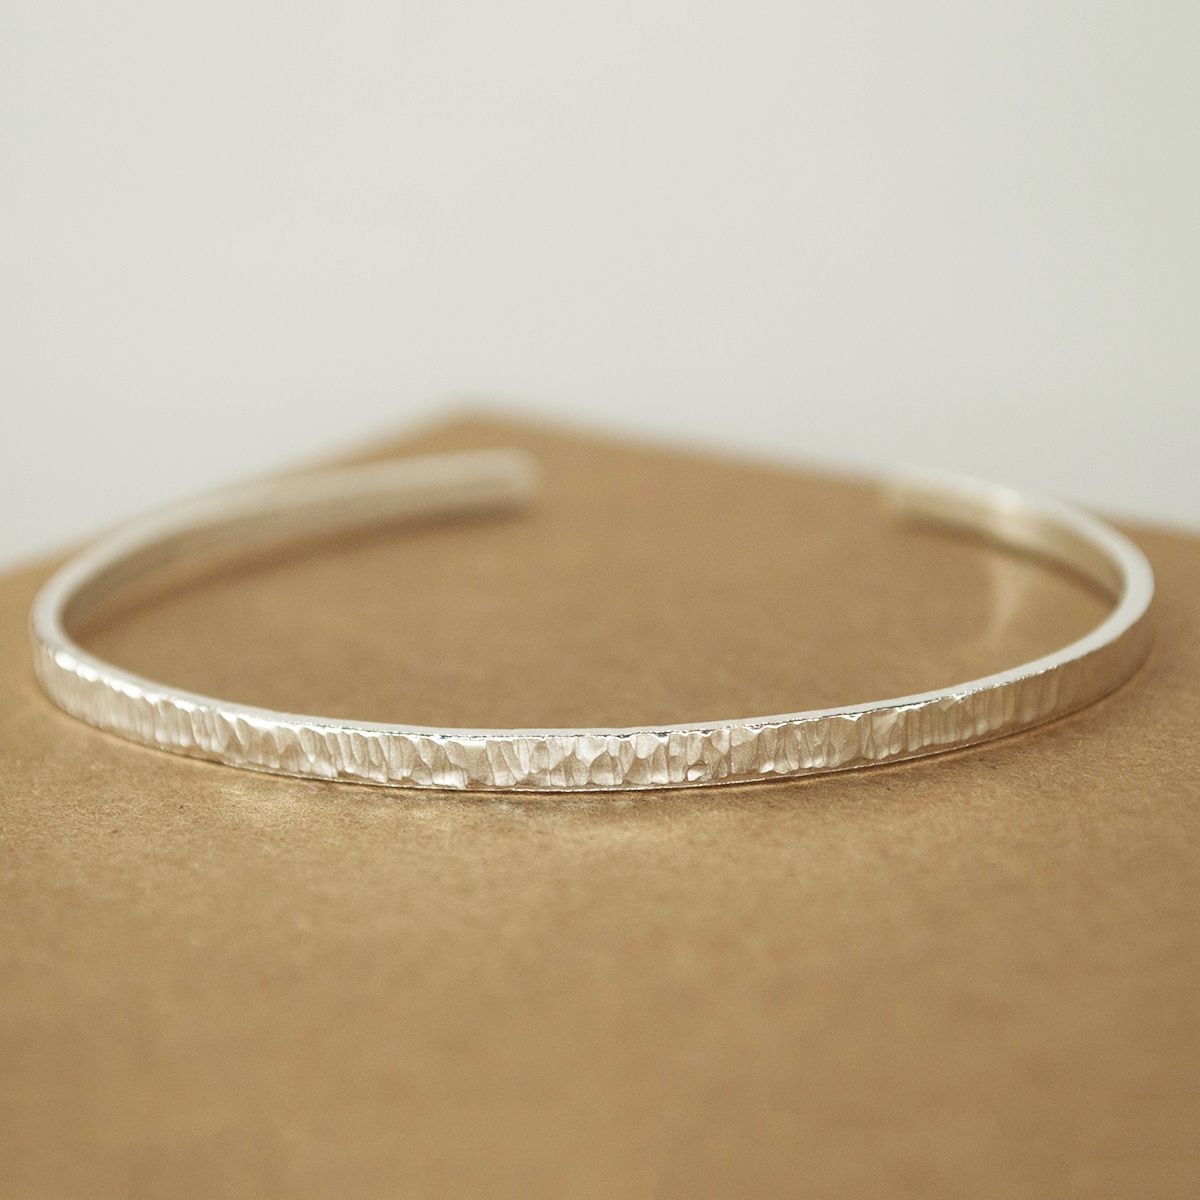 How To Make A Textured Cuff Bracelet